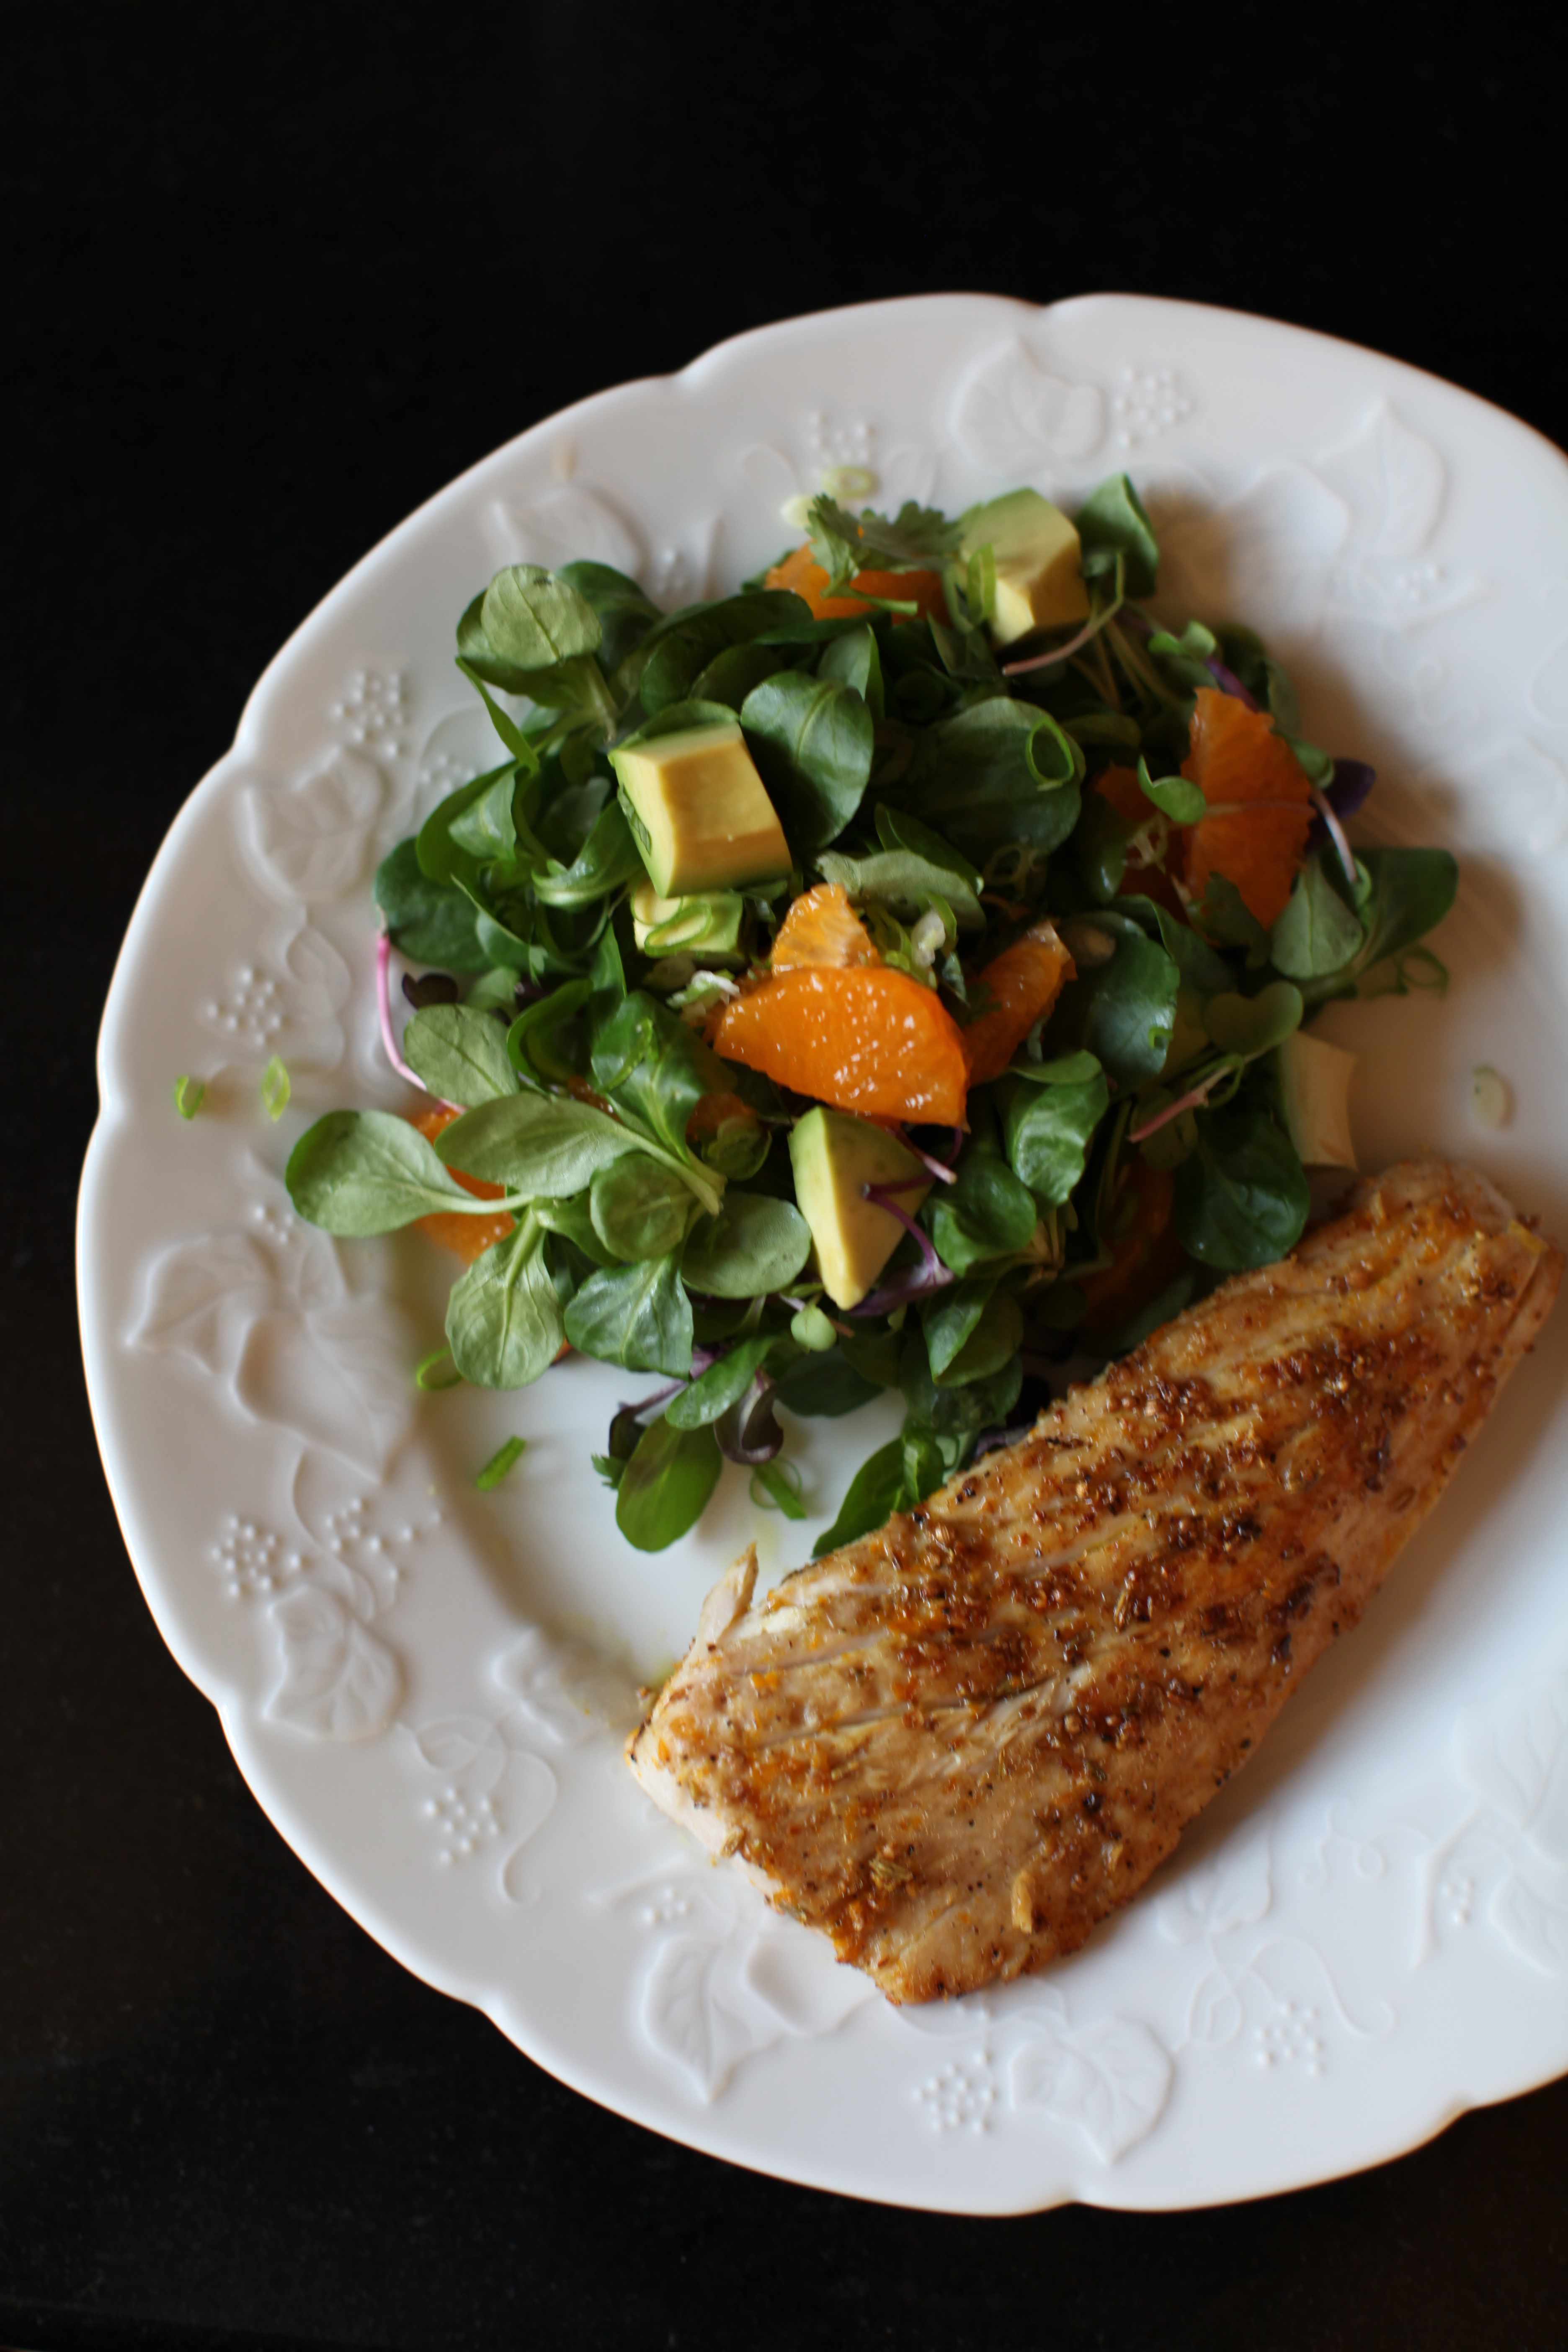 Seared Tuna, Salad with Clementines and Avocado